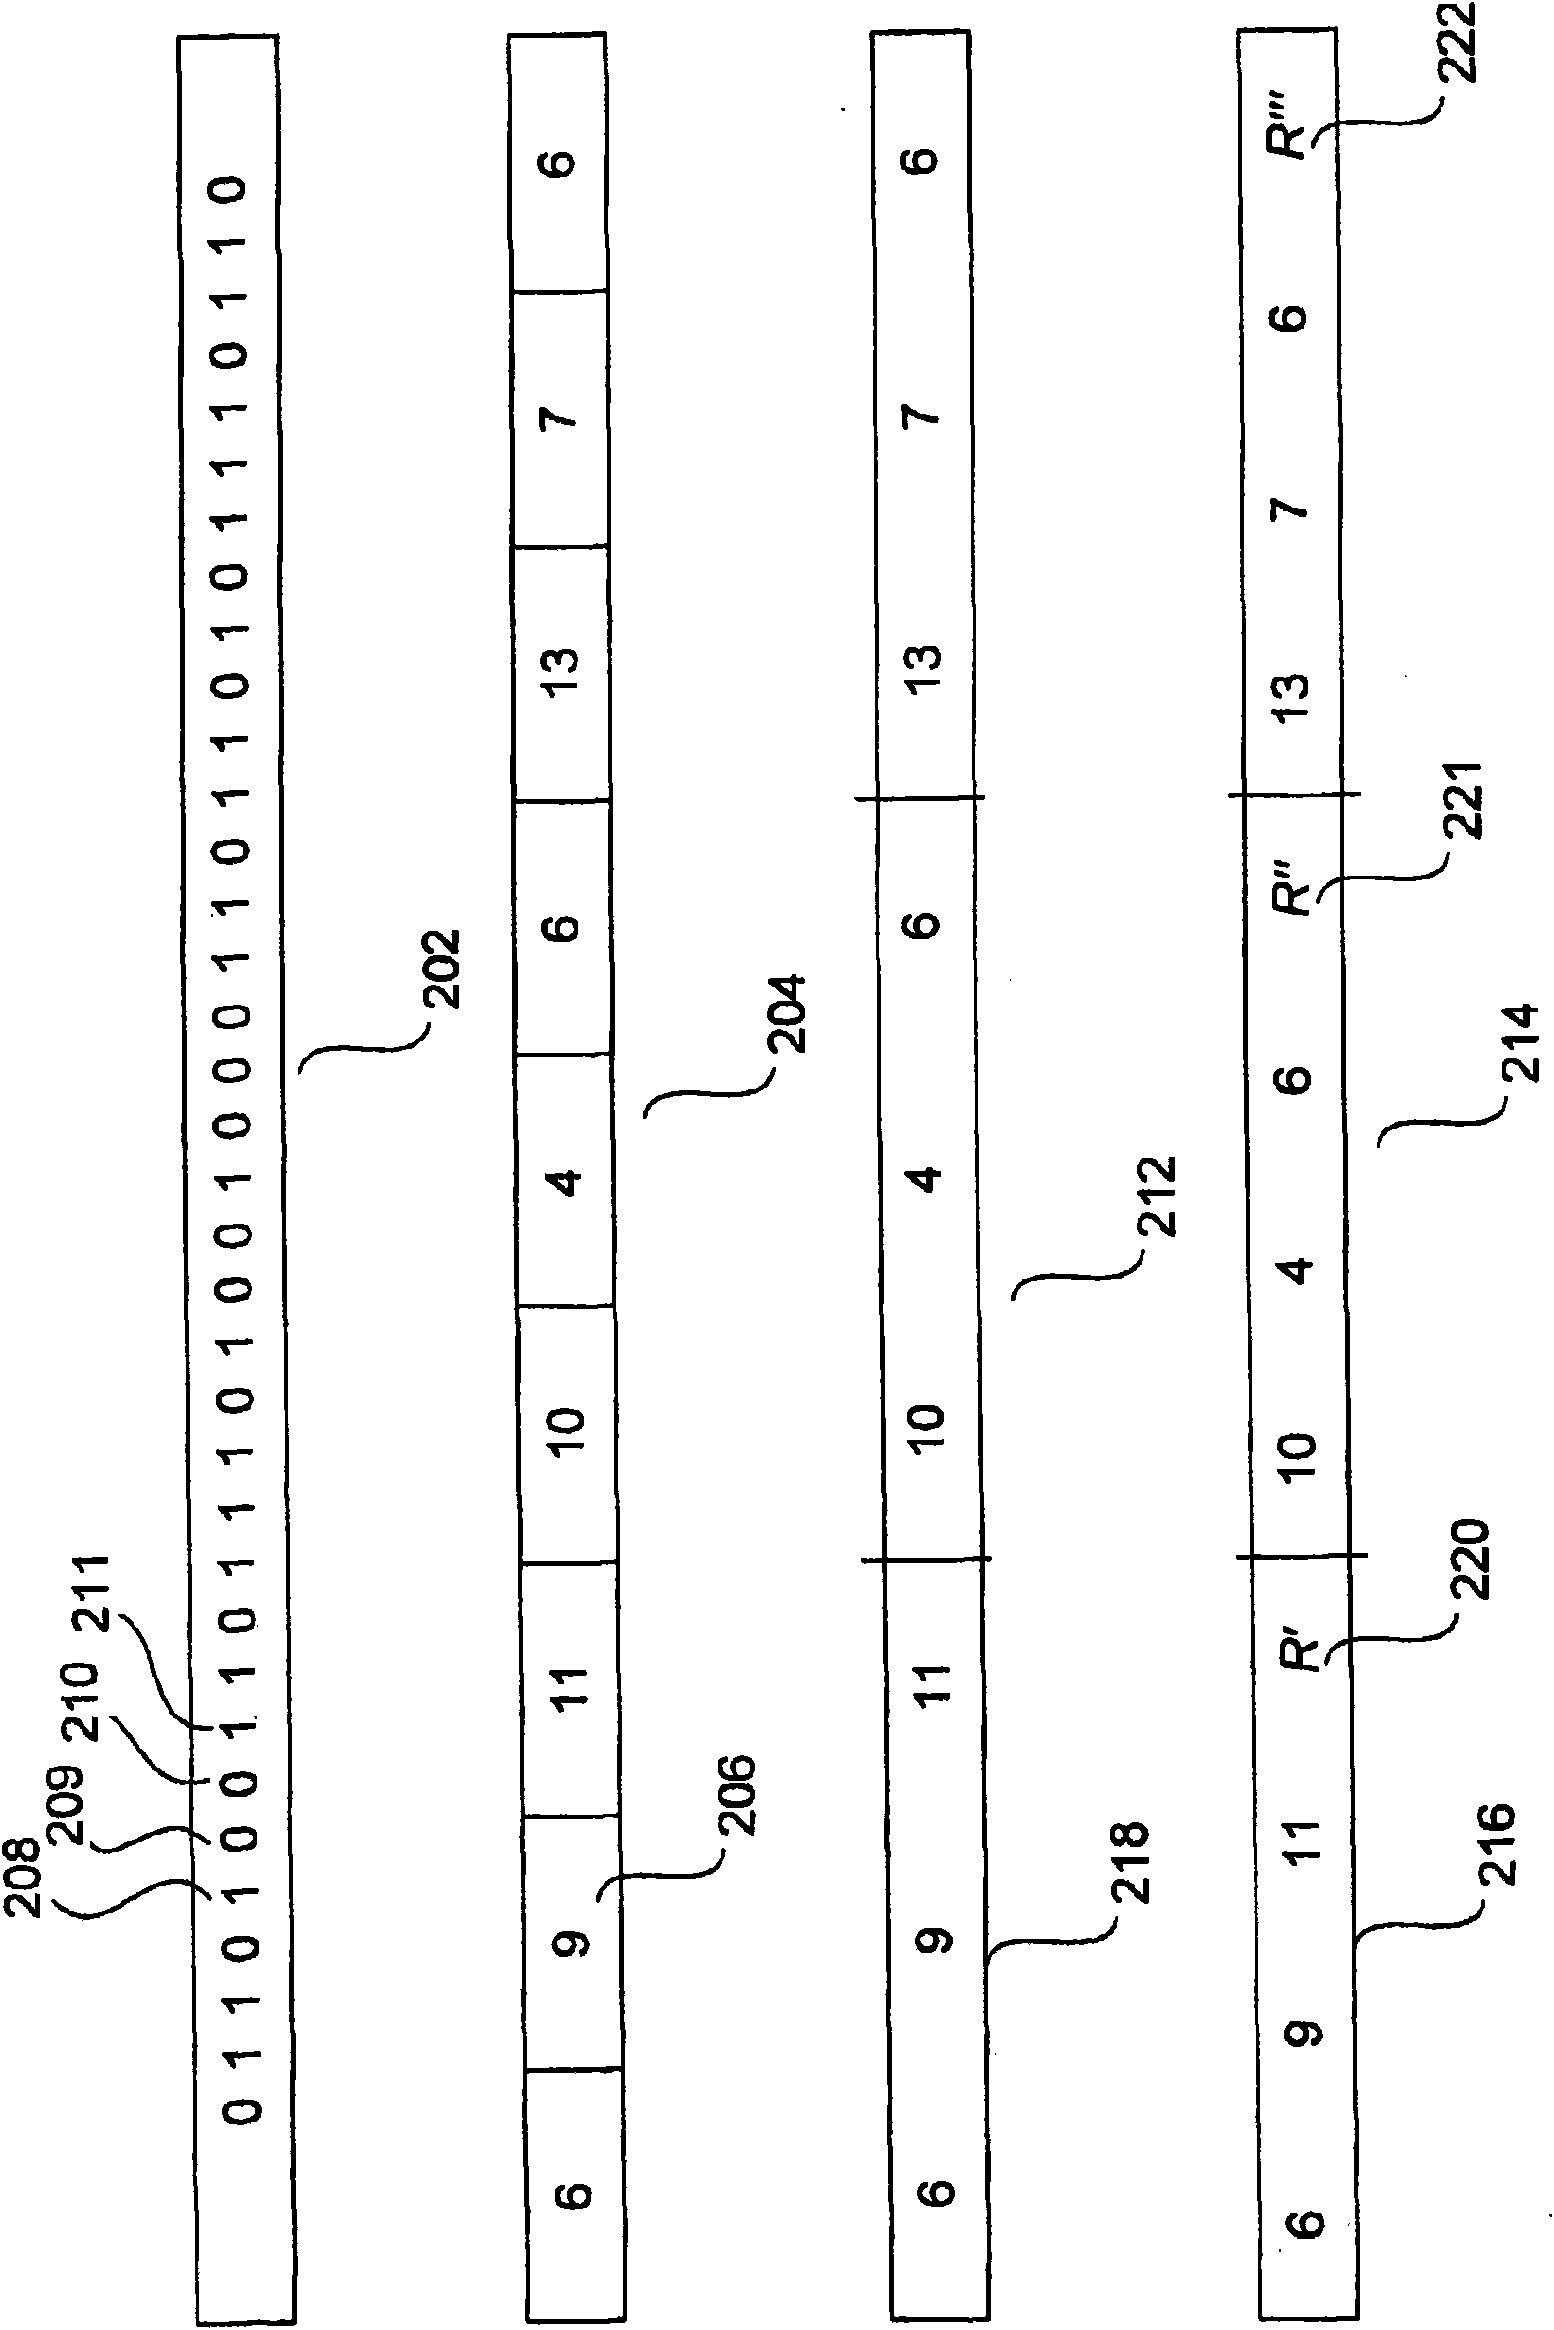 Method and system for detection and correction of phased-burst errors, erasures, symbol errors, and bit errors in a received symbol string